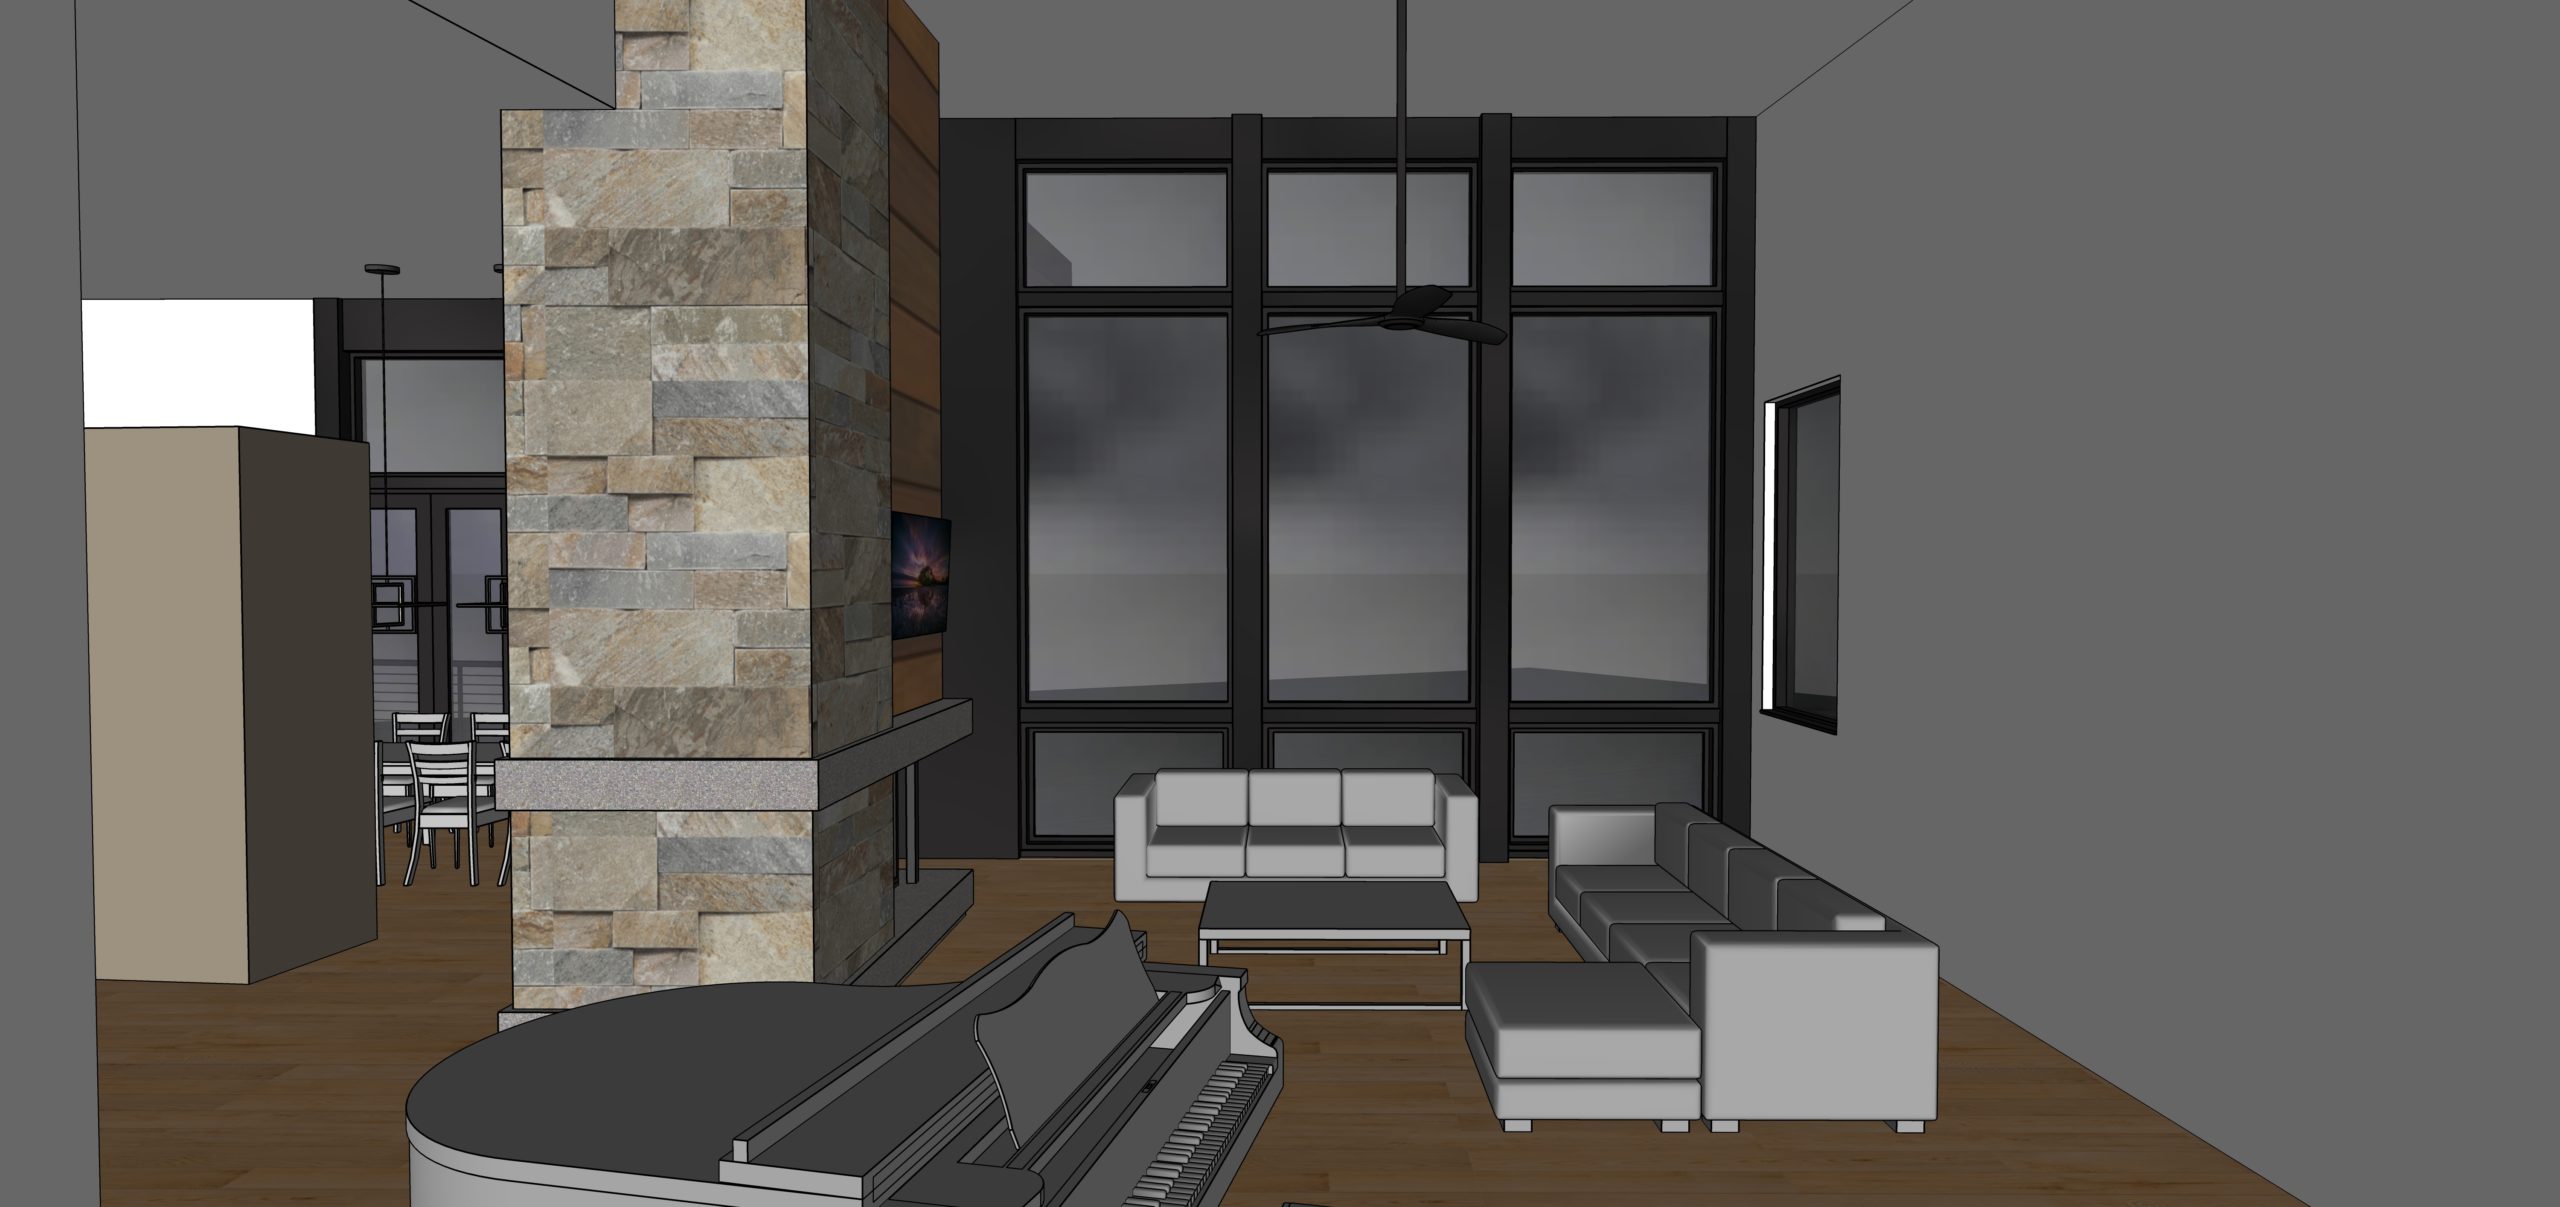 rendering of house interior